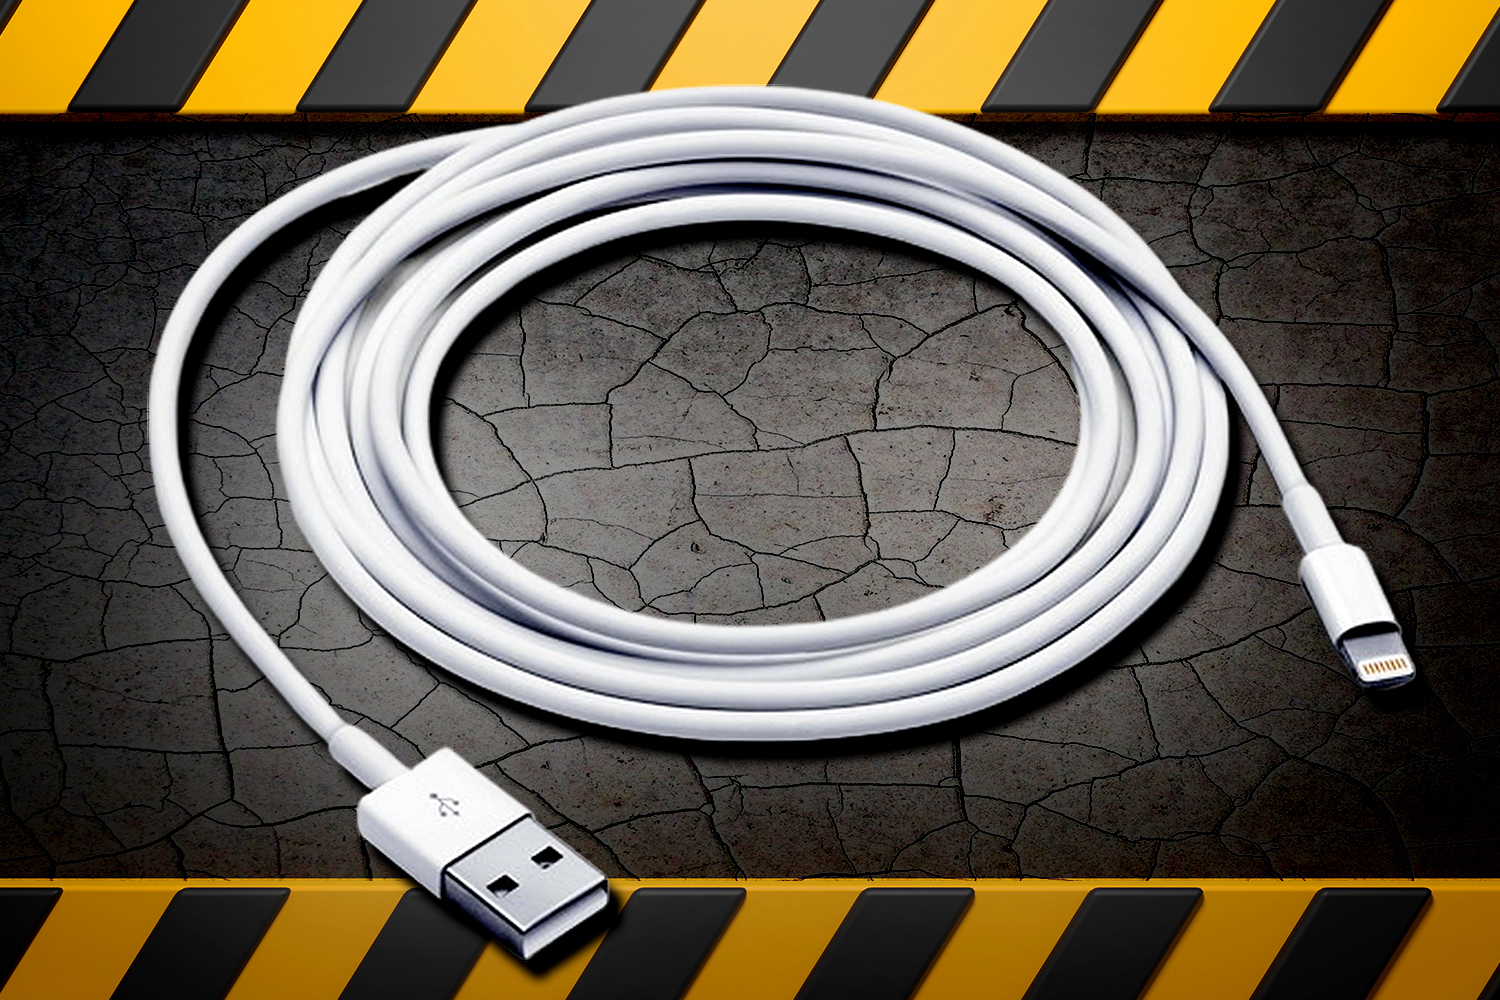 Urgent warning to ALL iPhone users – check your charging cable now for 3 signs of danger